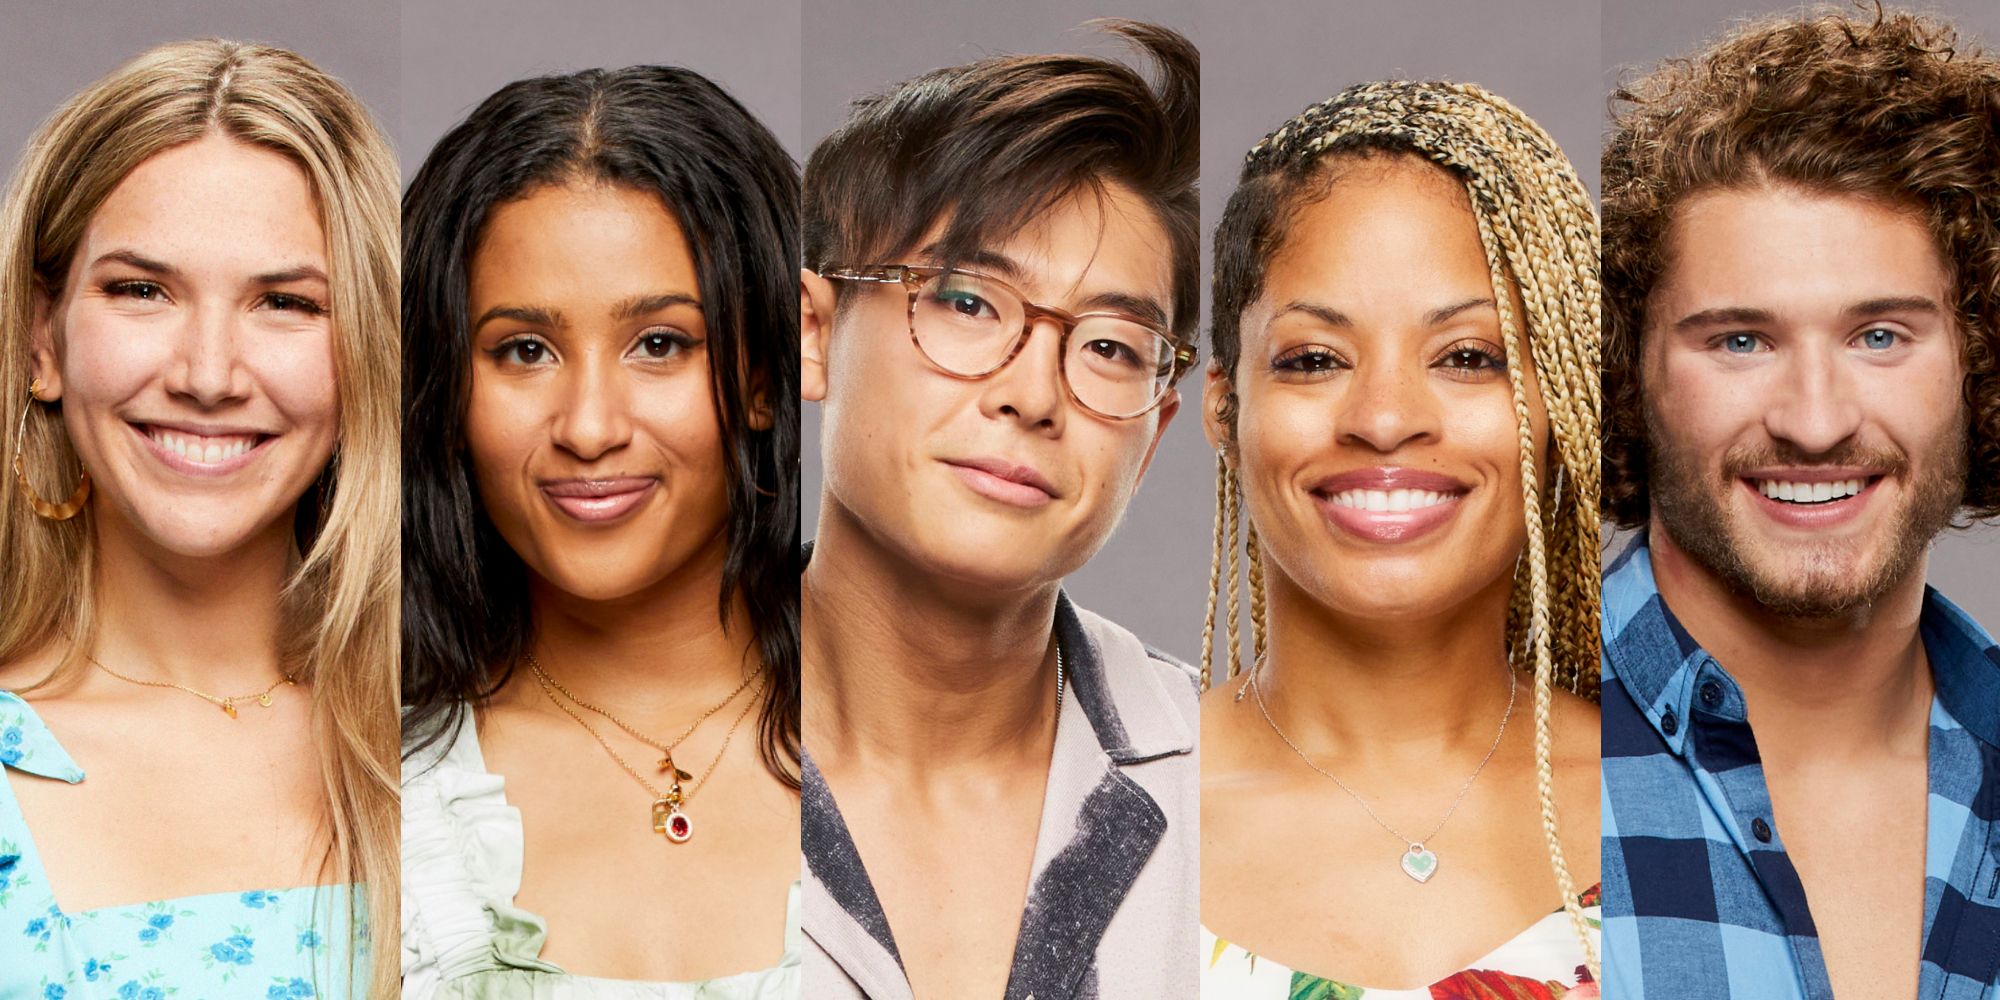 Claire Rehfuss, Hannah Chaddha, Derek Xiao, Tiffany Mitchell, and Christian Birkenberger on Big Brother 23